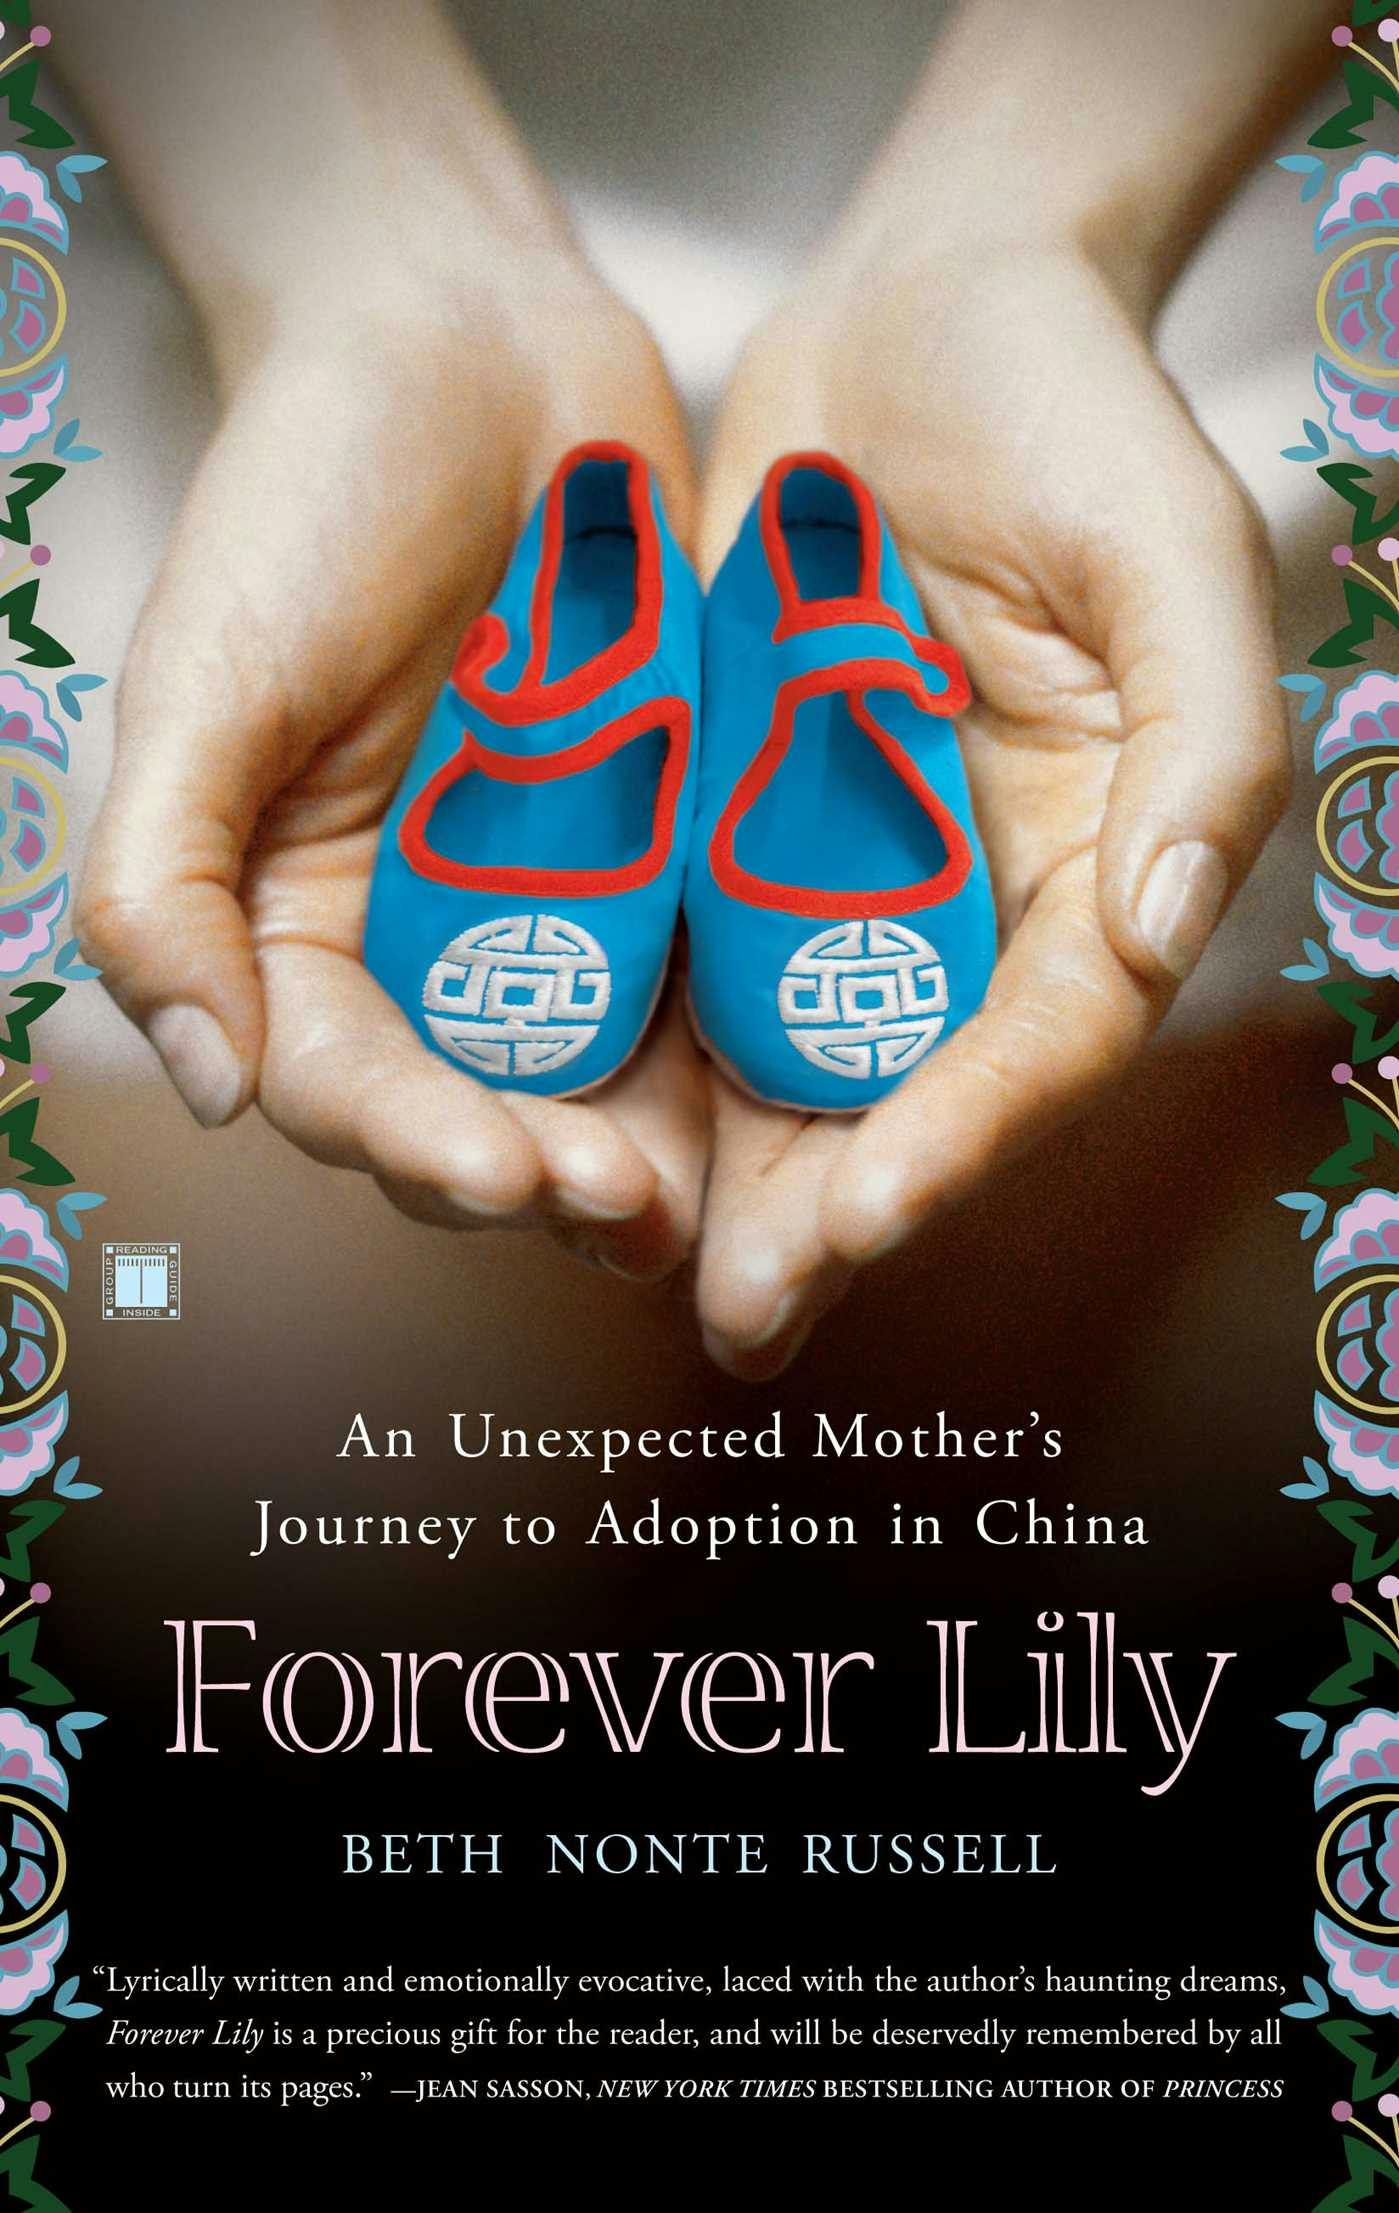 Forever Lily: An Unexpected Mother's Journey to Adoption in China - Beth Nonte Russell